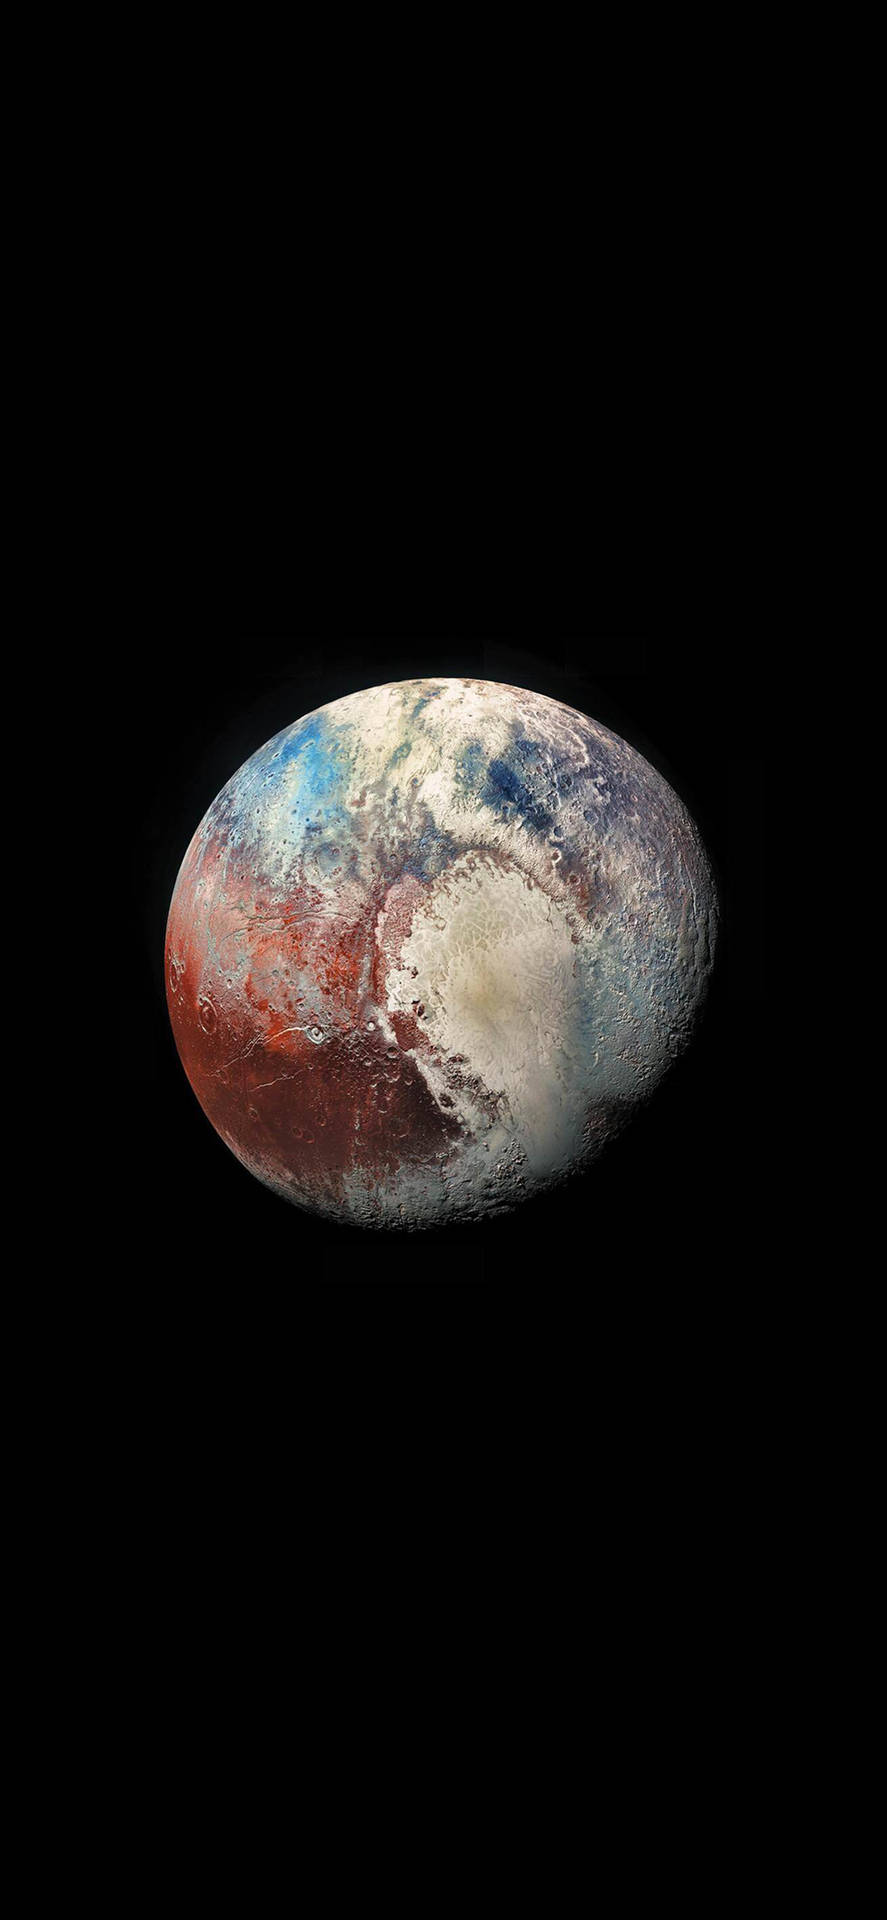 Amoled Pluto Space View Wallpaper